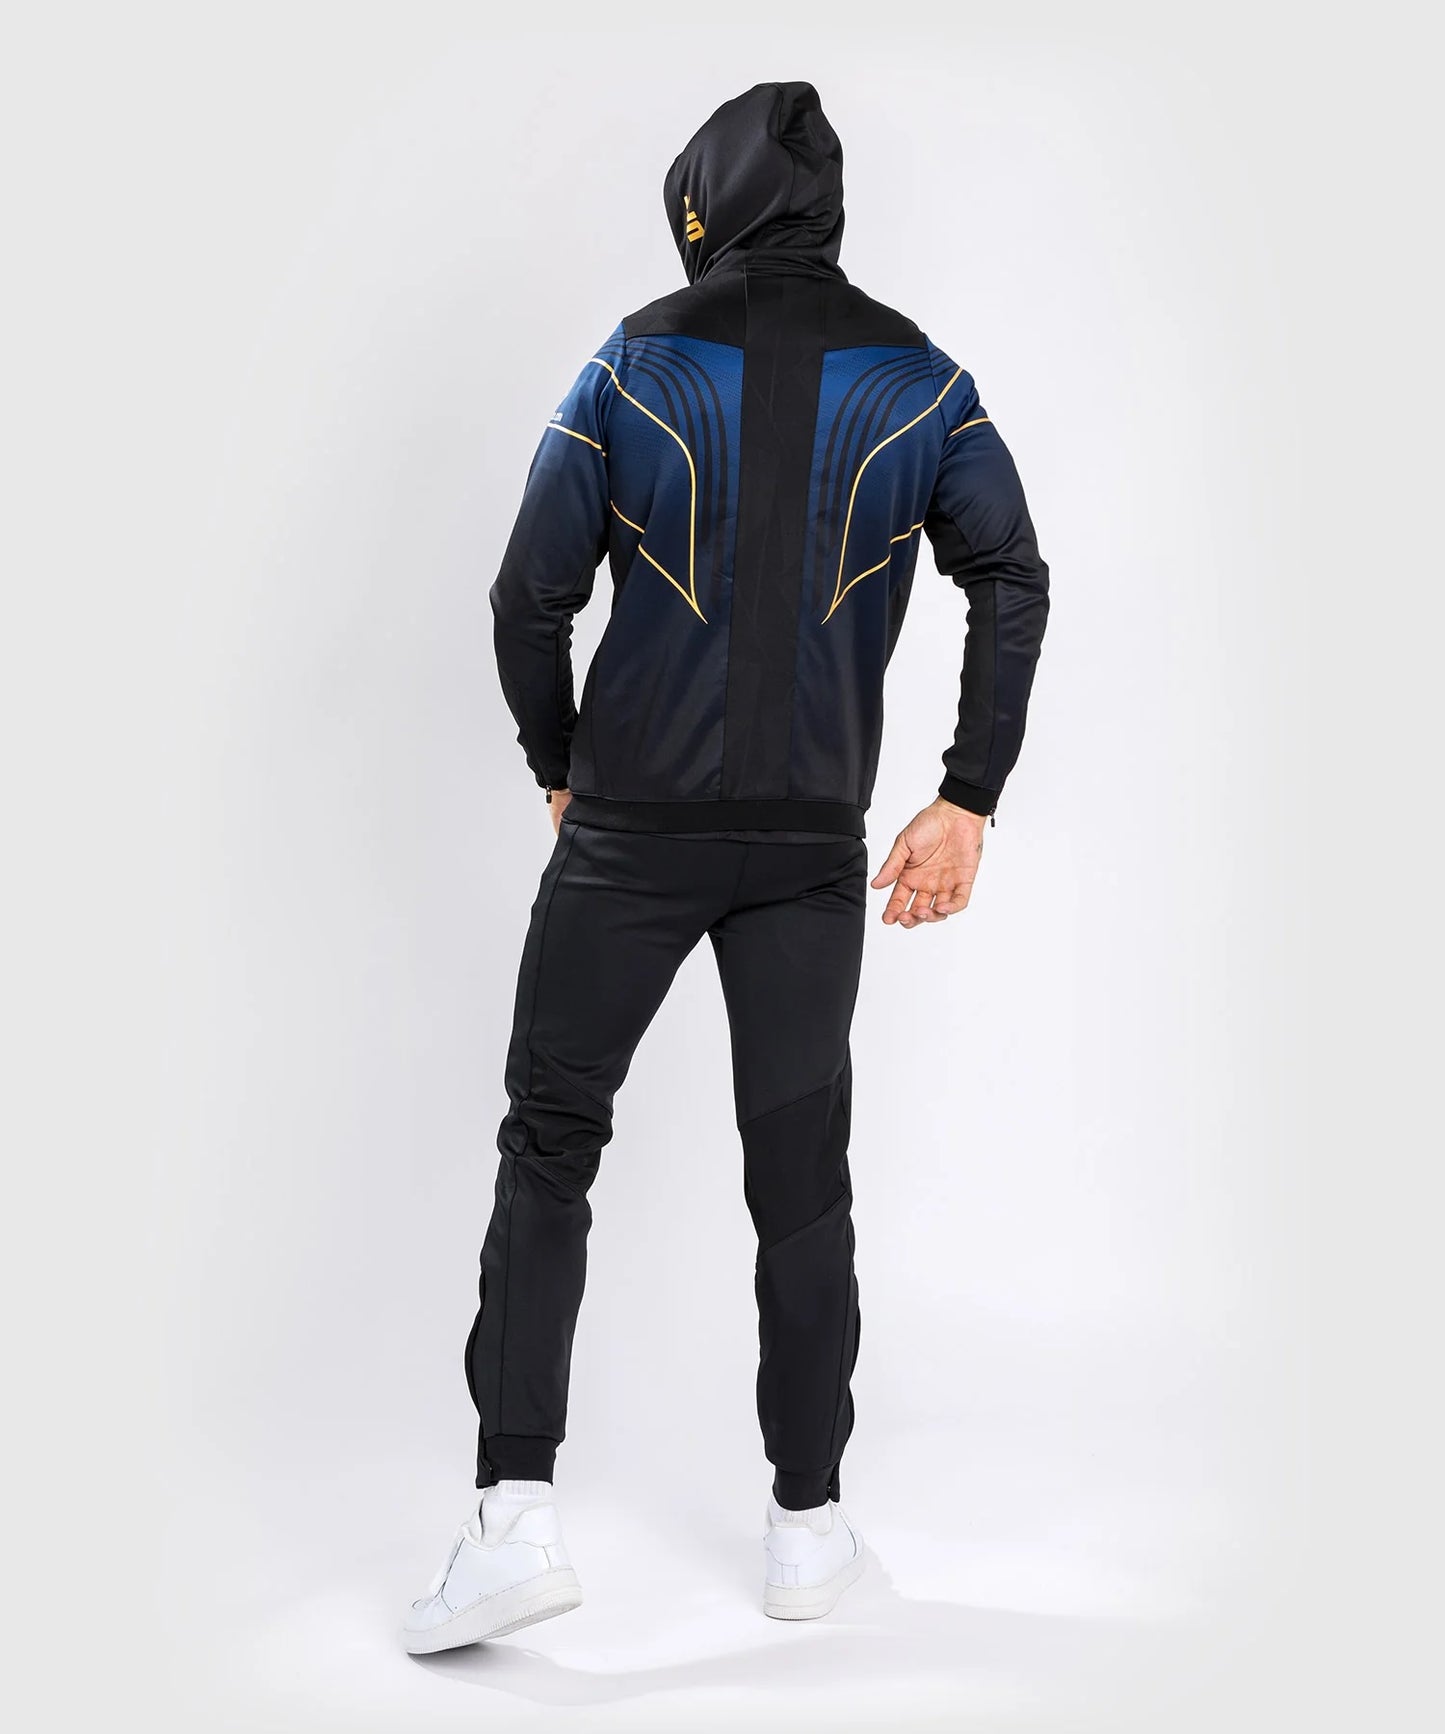 UFC Authentic Fight Night 2.0 Men's Walkout Hoodie - Midnight Edition - Champion - Blue/Black/Gold